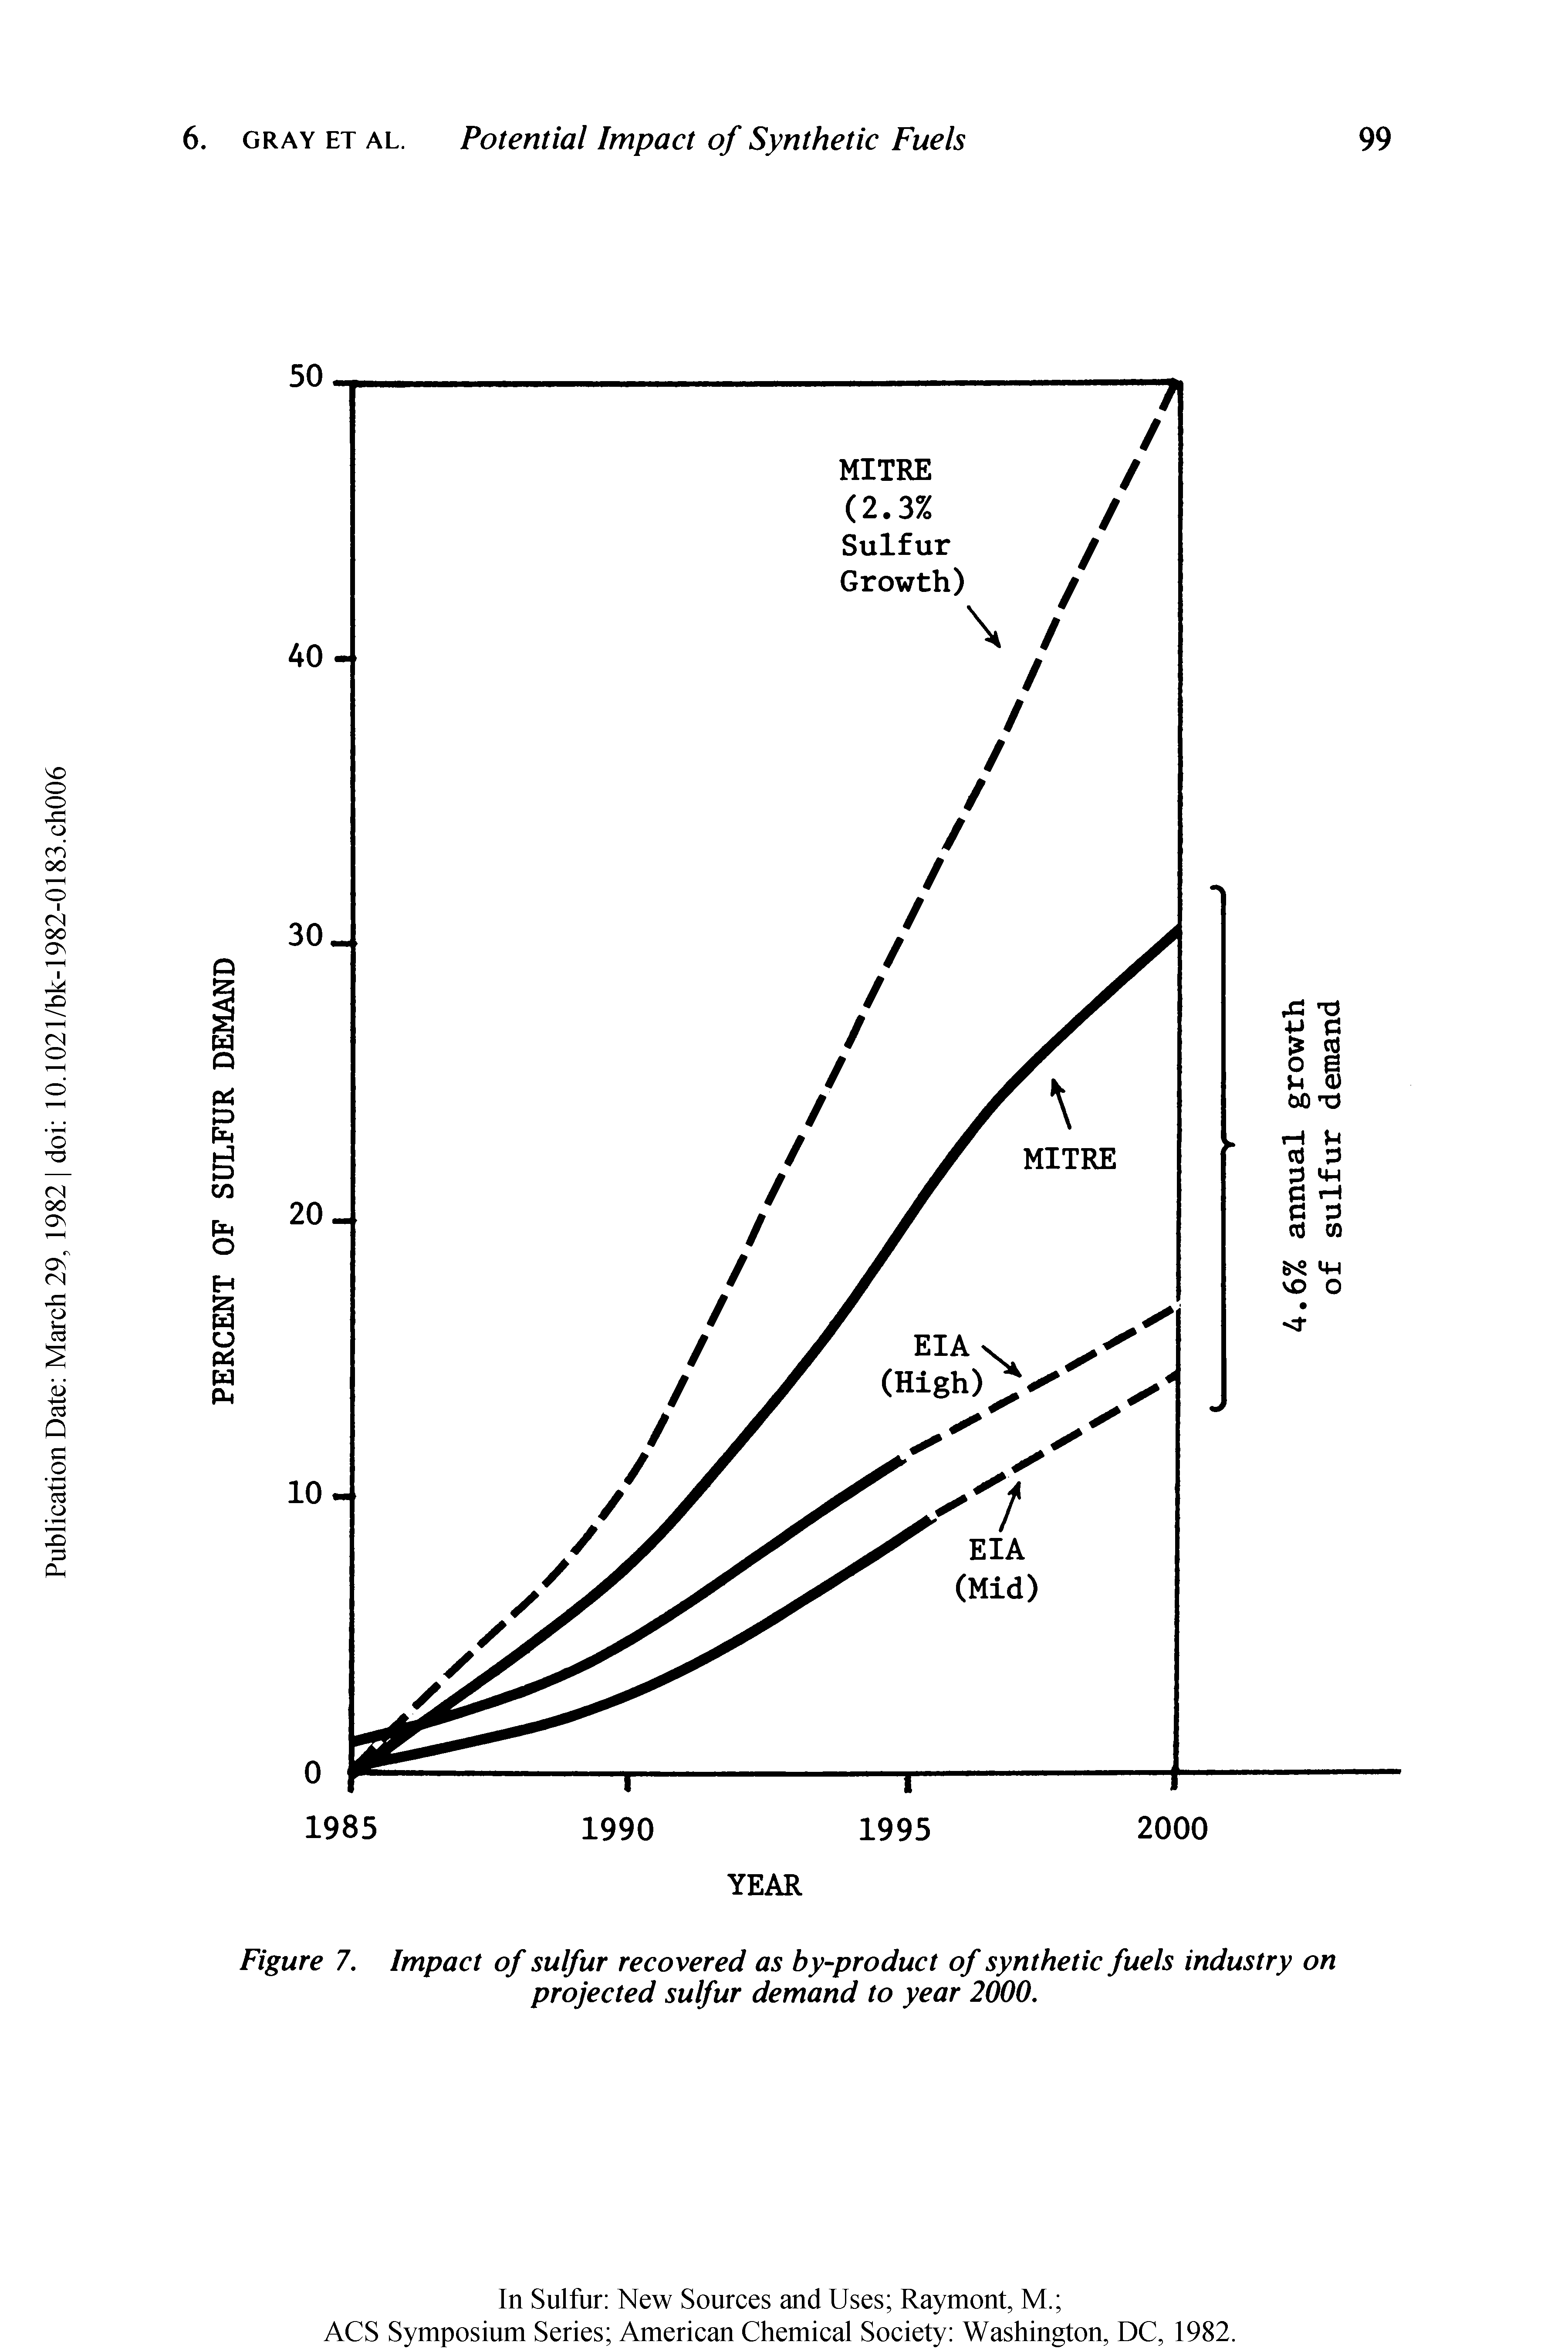 Figure 7. Impact of sulfur recovered as by-product of synthetic fuels industry on projected sulfur demand to year 2000.